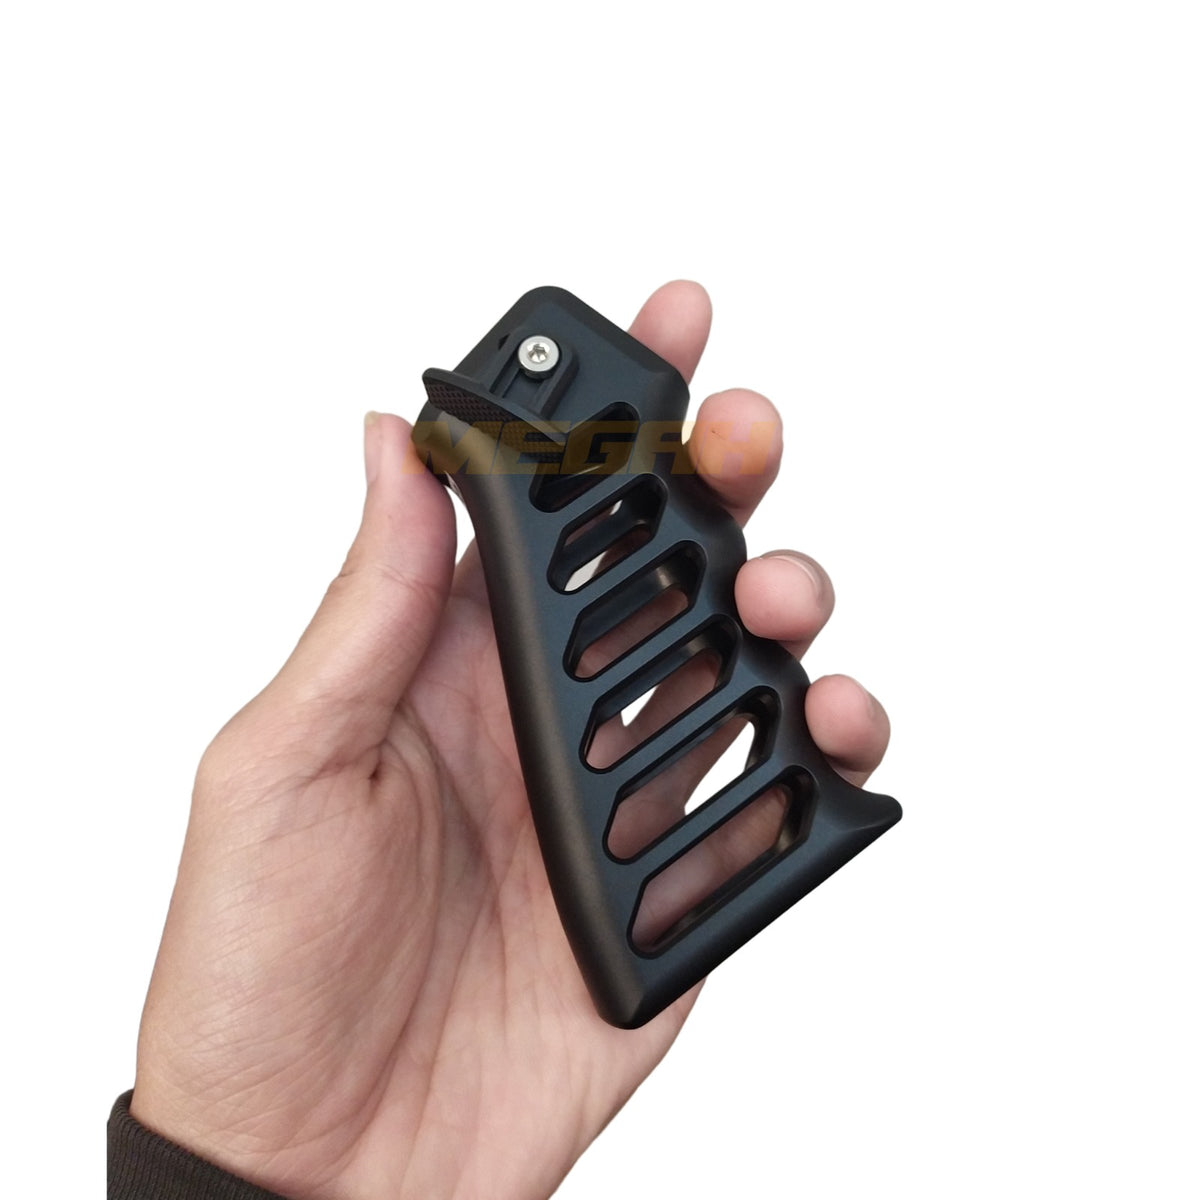 SABER TACTICAL AR STYLE GRIP WITH THUMB REST